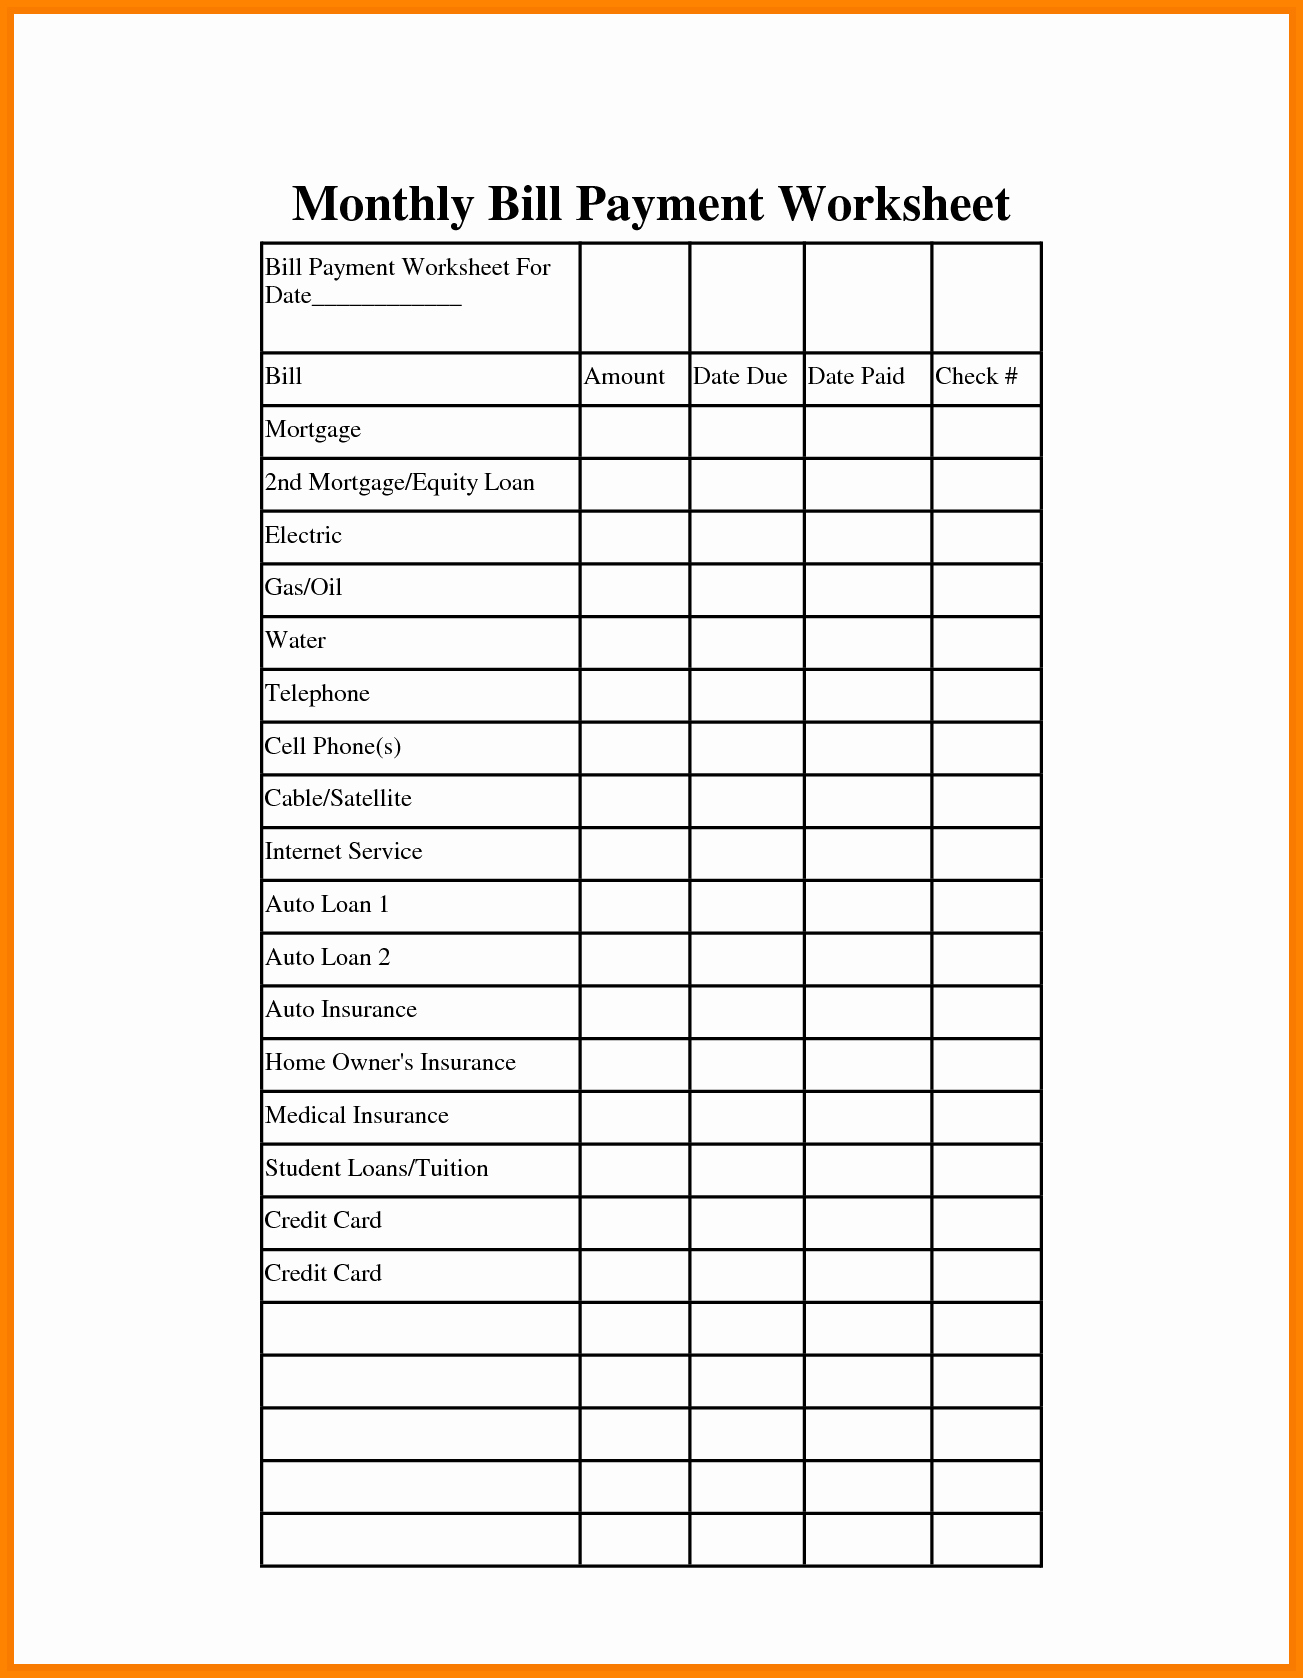 Monthly Bill organizer Template Excel Awesome Remarkable Monthly Bill organizer and Payment Schedule